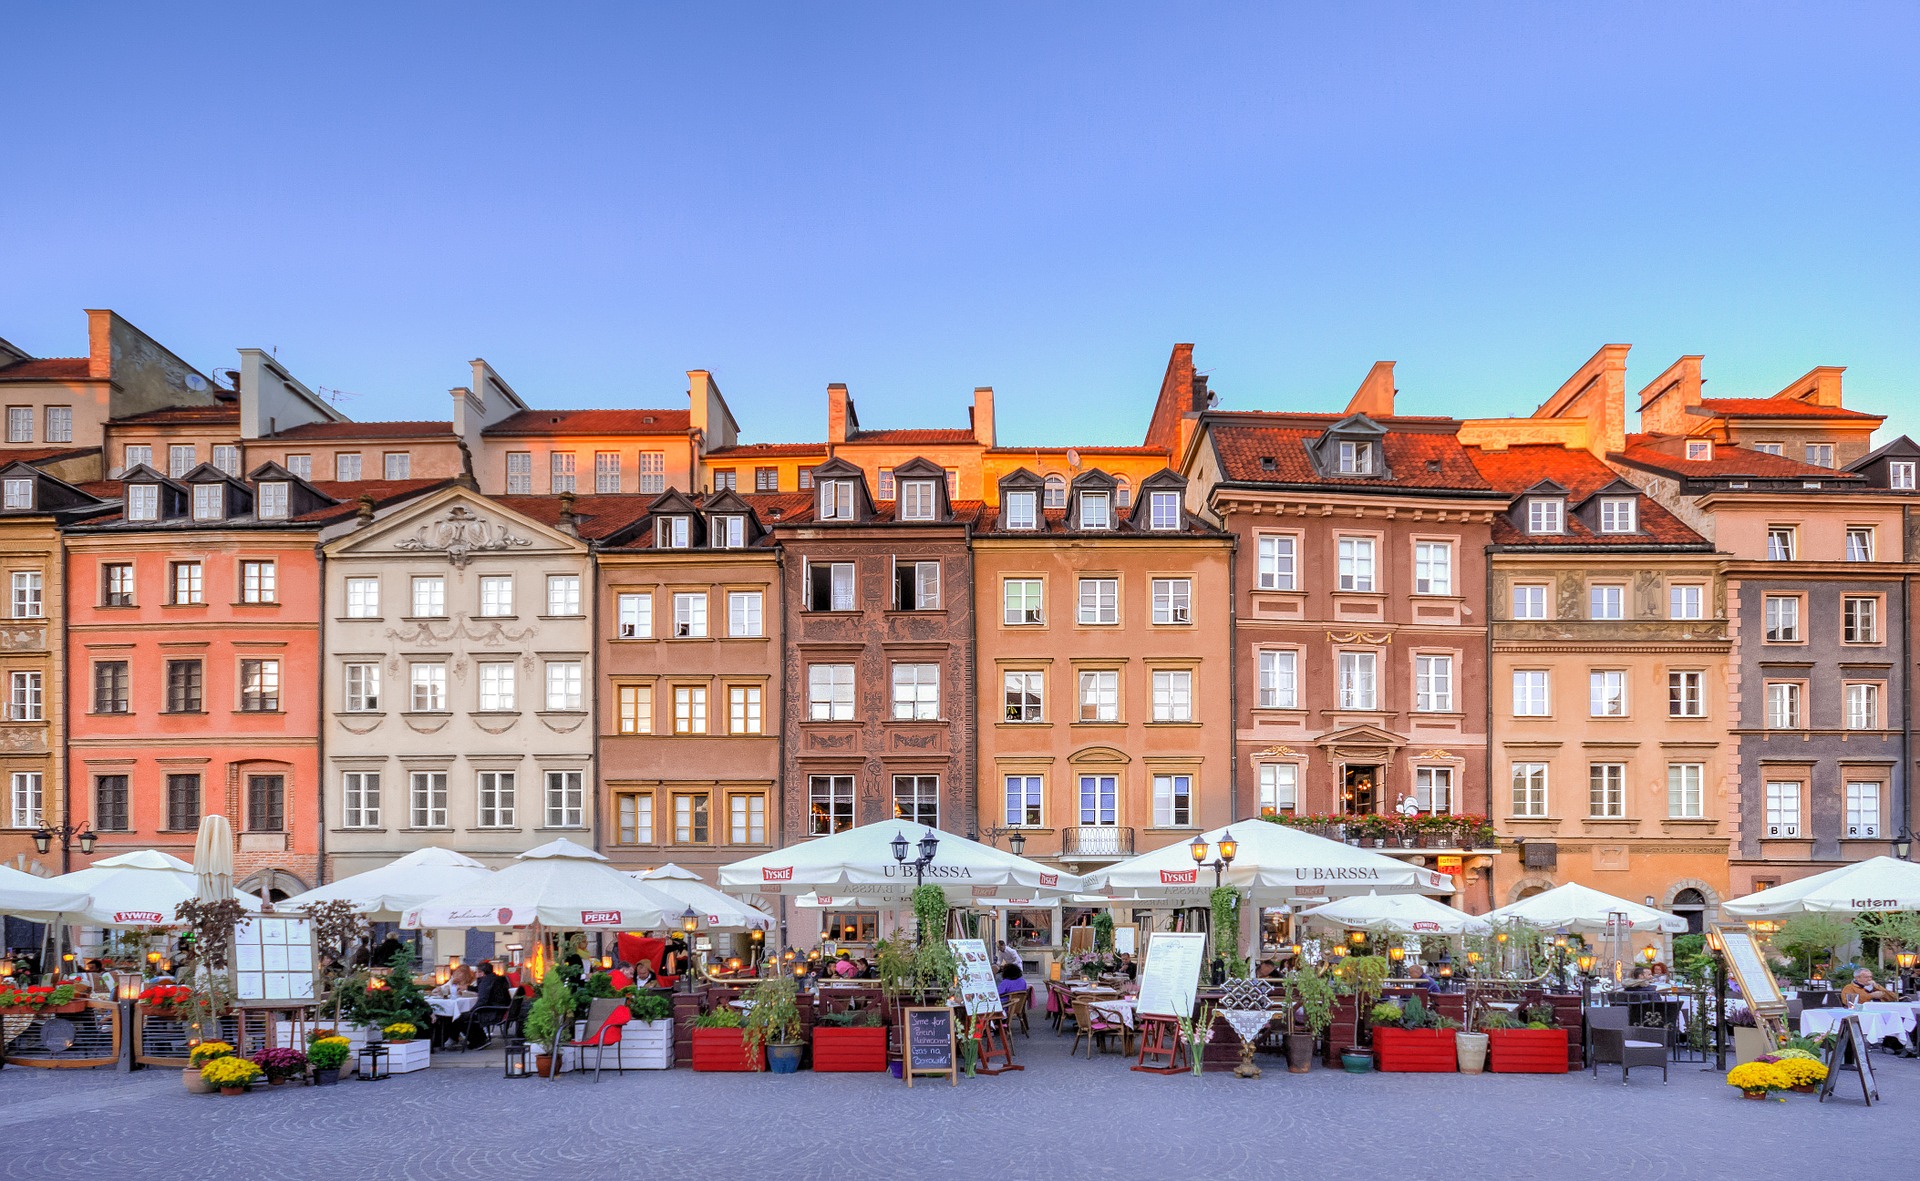 17 Things to Do in Warsaw Poland - Just a Pack